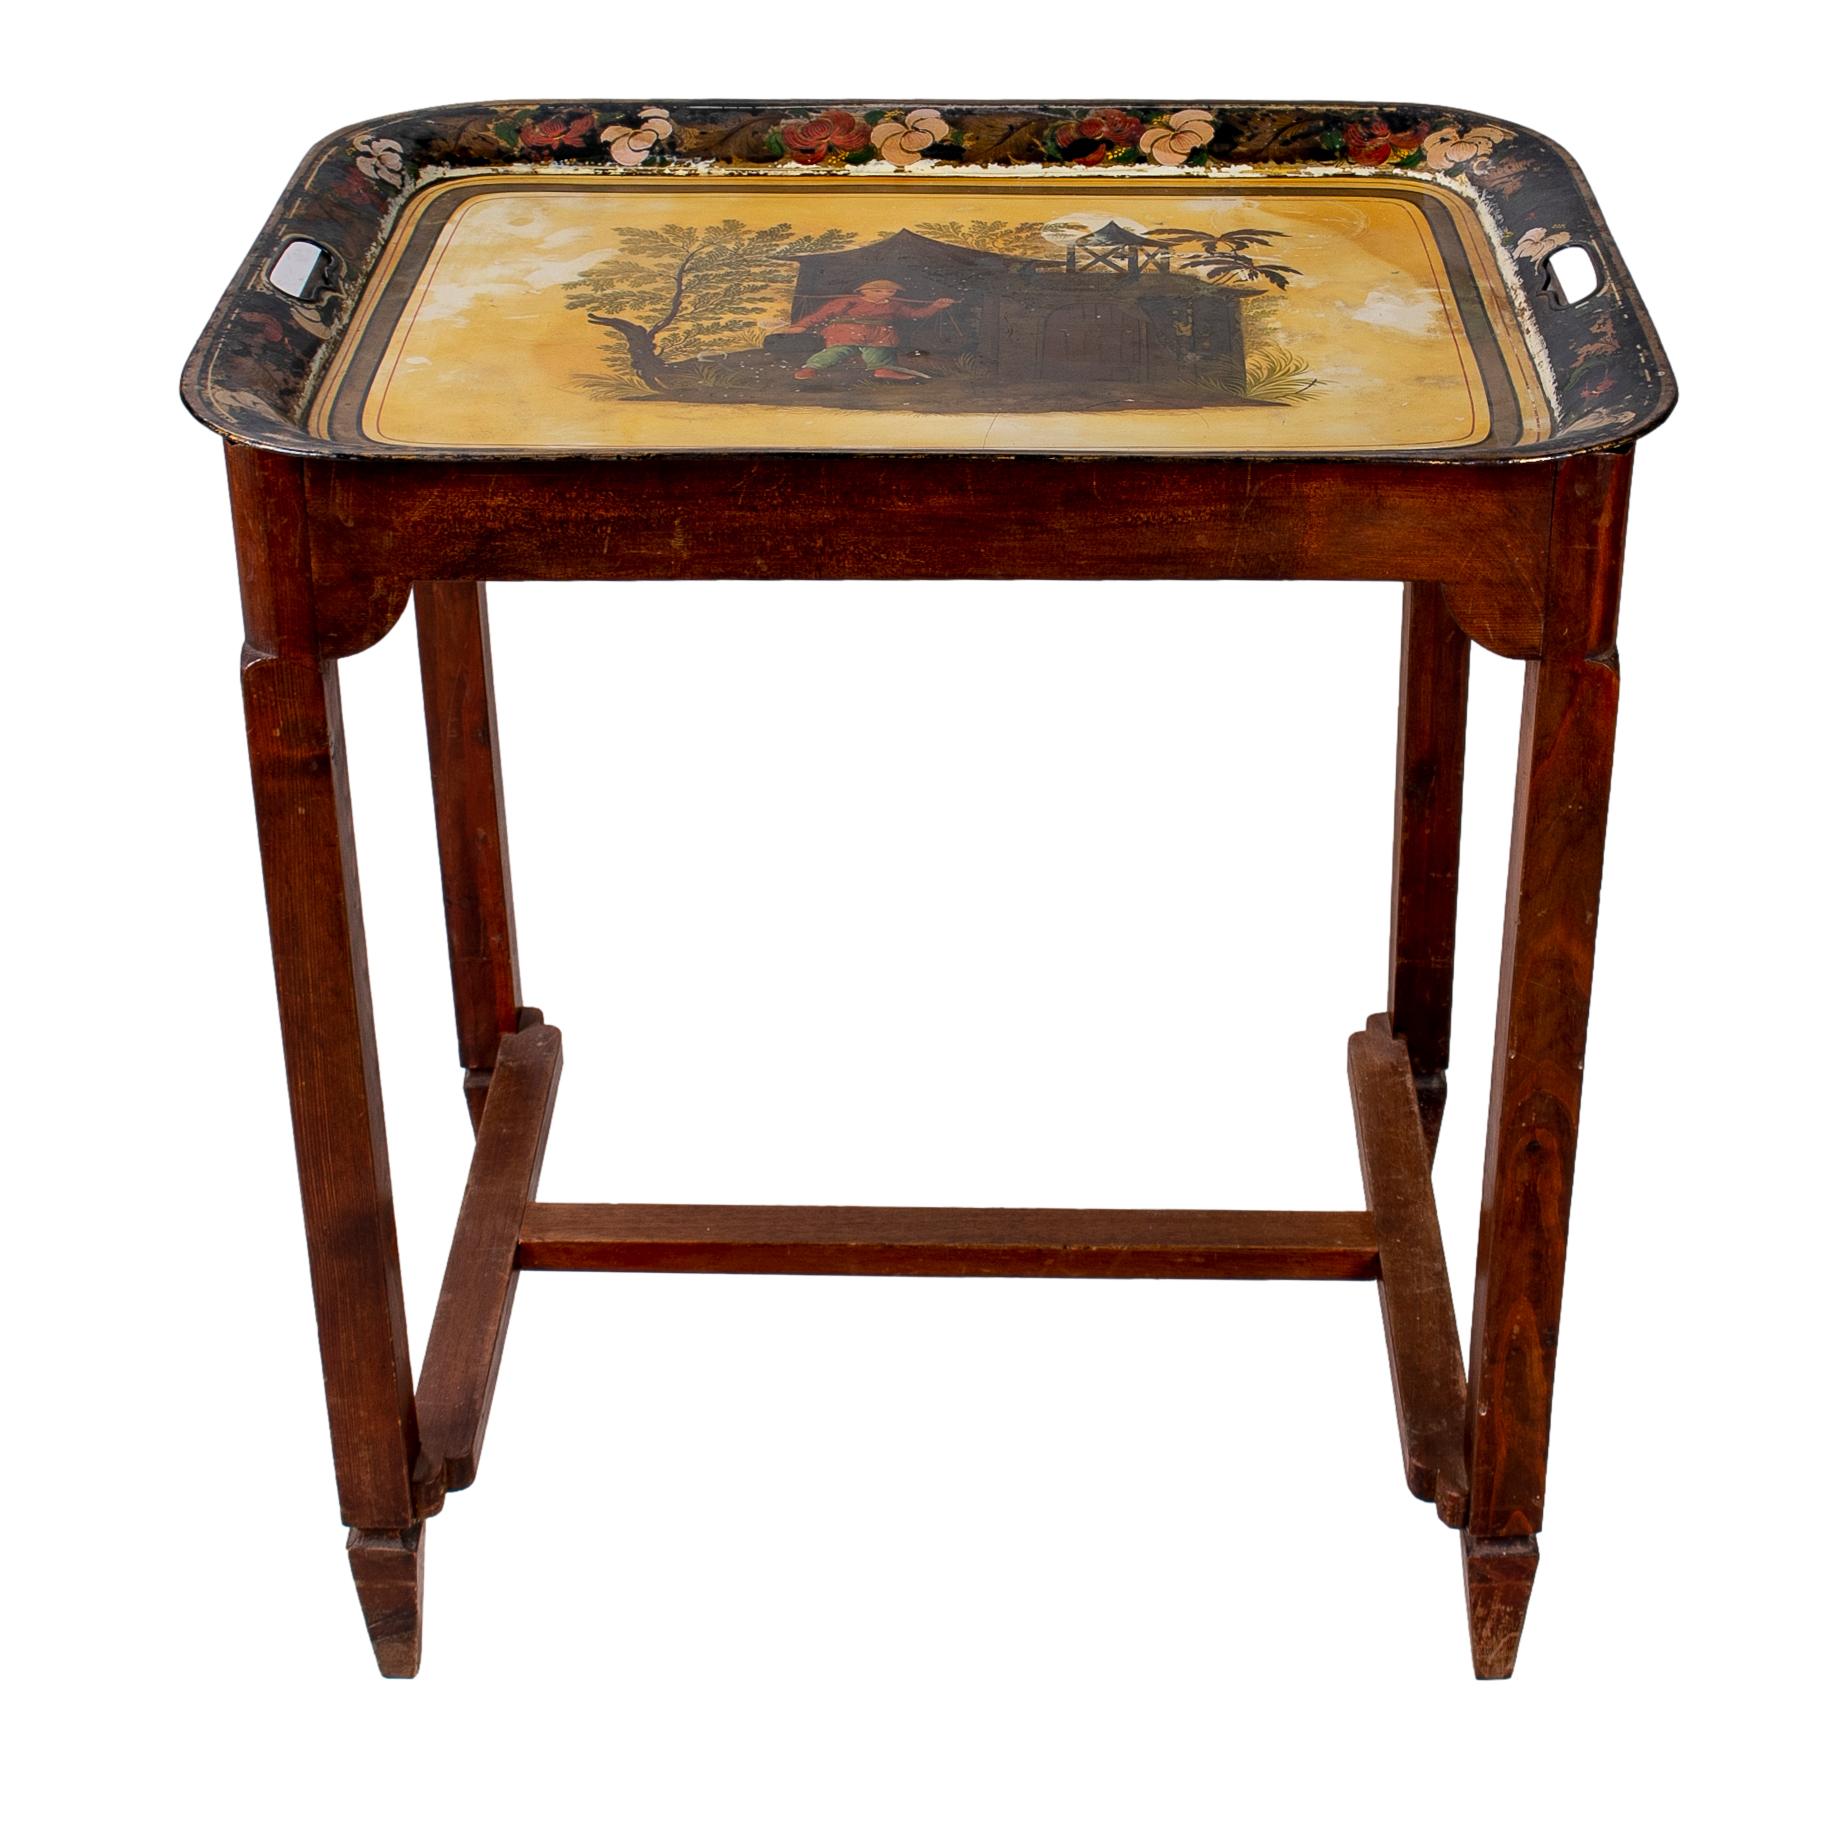 1920s French Chinoiserie style metallic tray with wooden stand table.